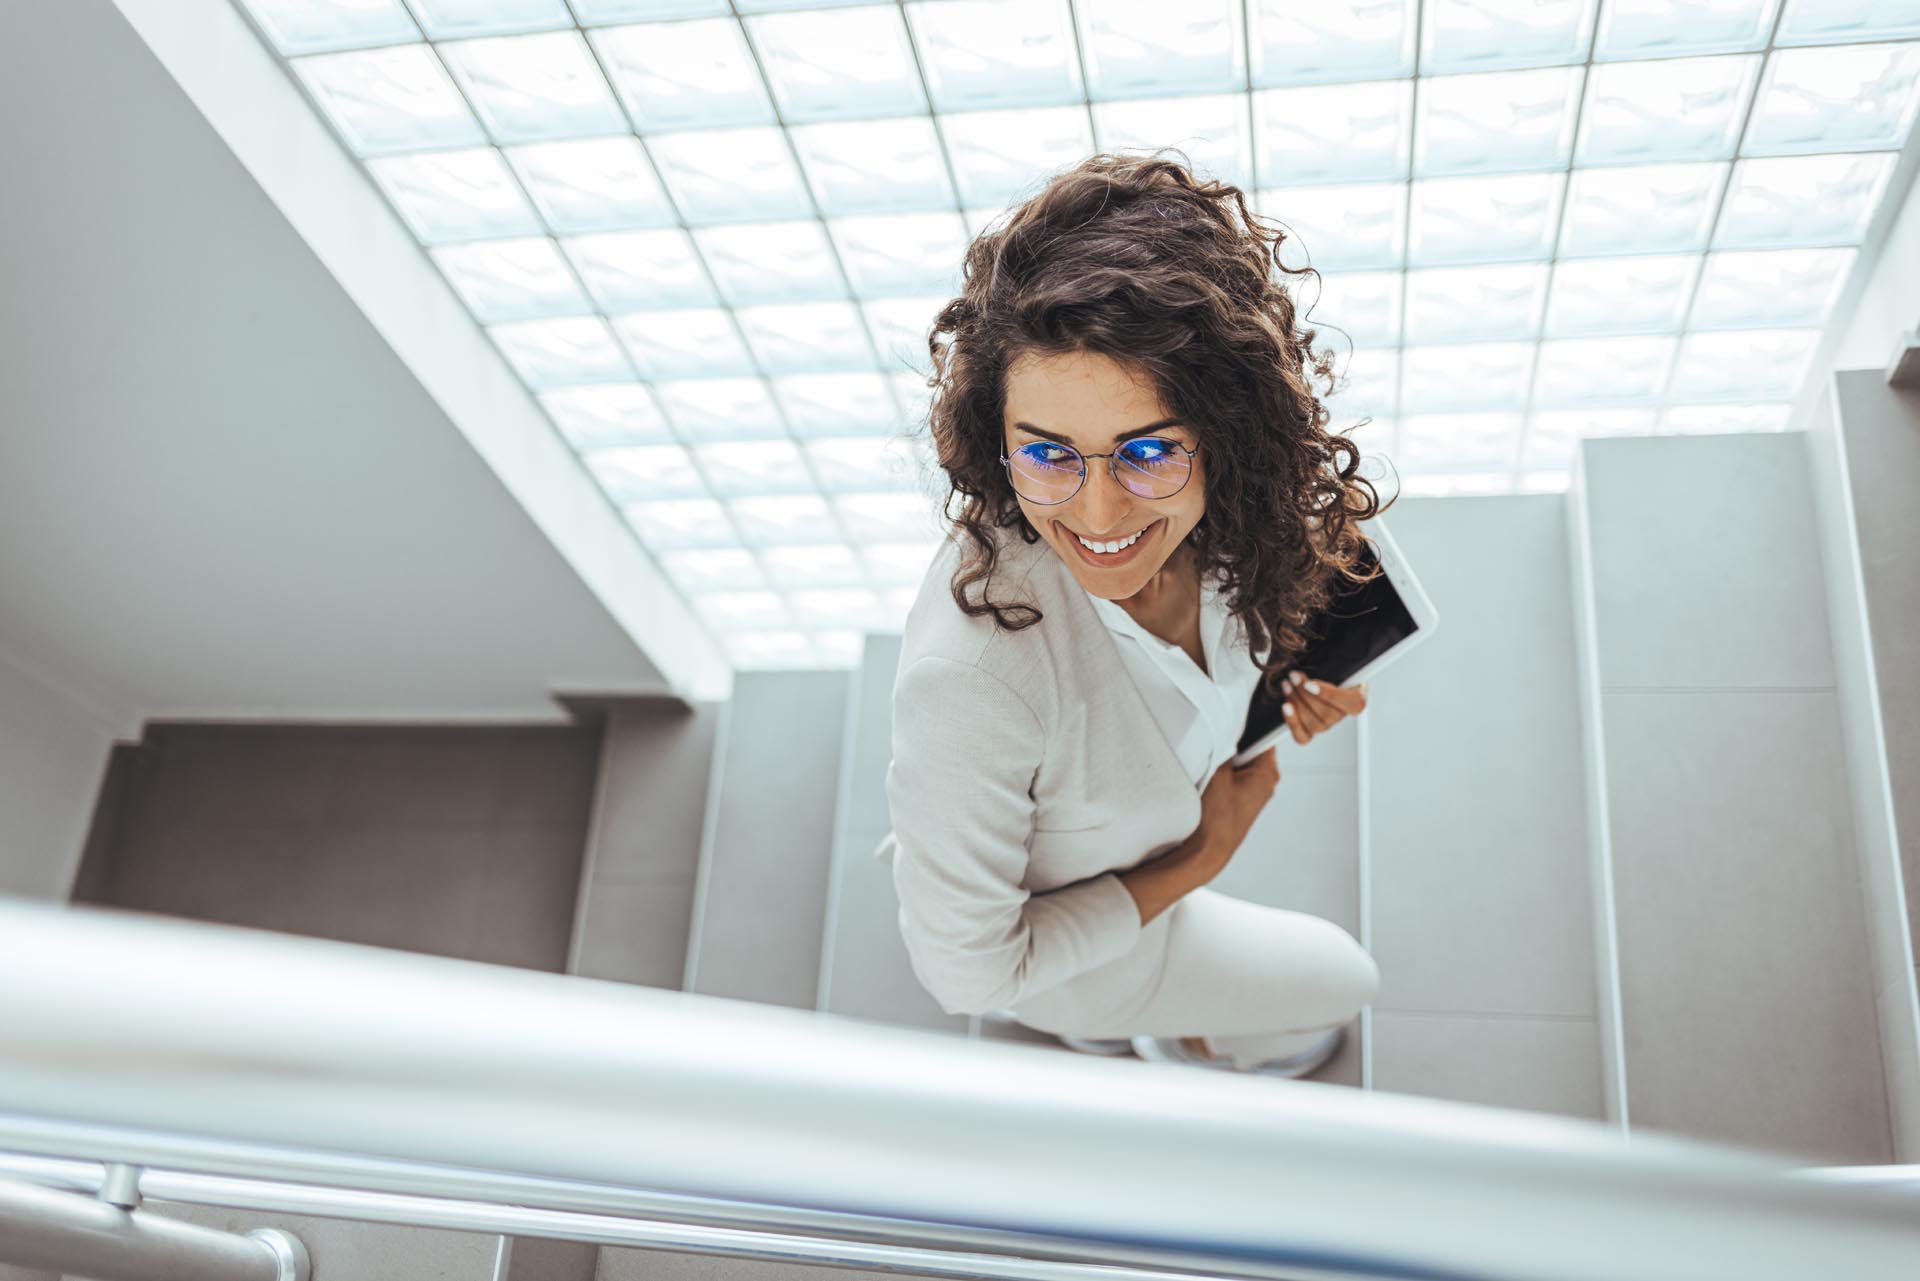 Portrait of young Caucasian businesswoman wearing high-heeled shoes walking upstairs and using digital tablet. Business concept. Cute young businesswoman walking up stairs